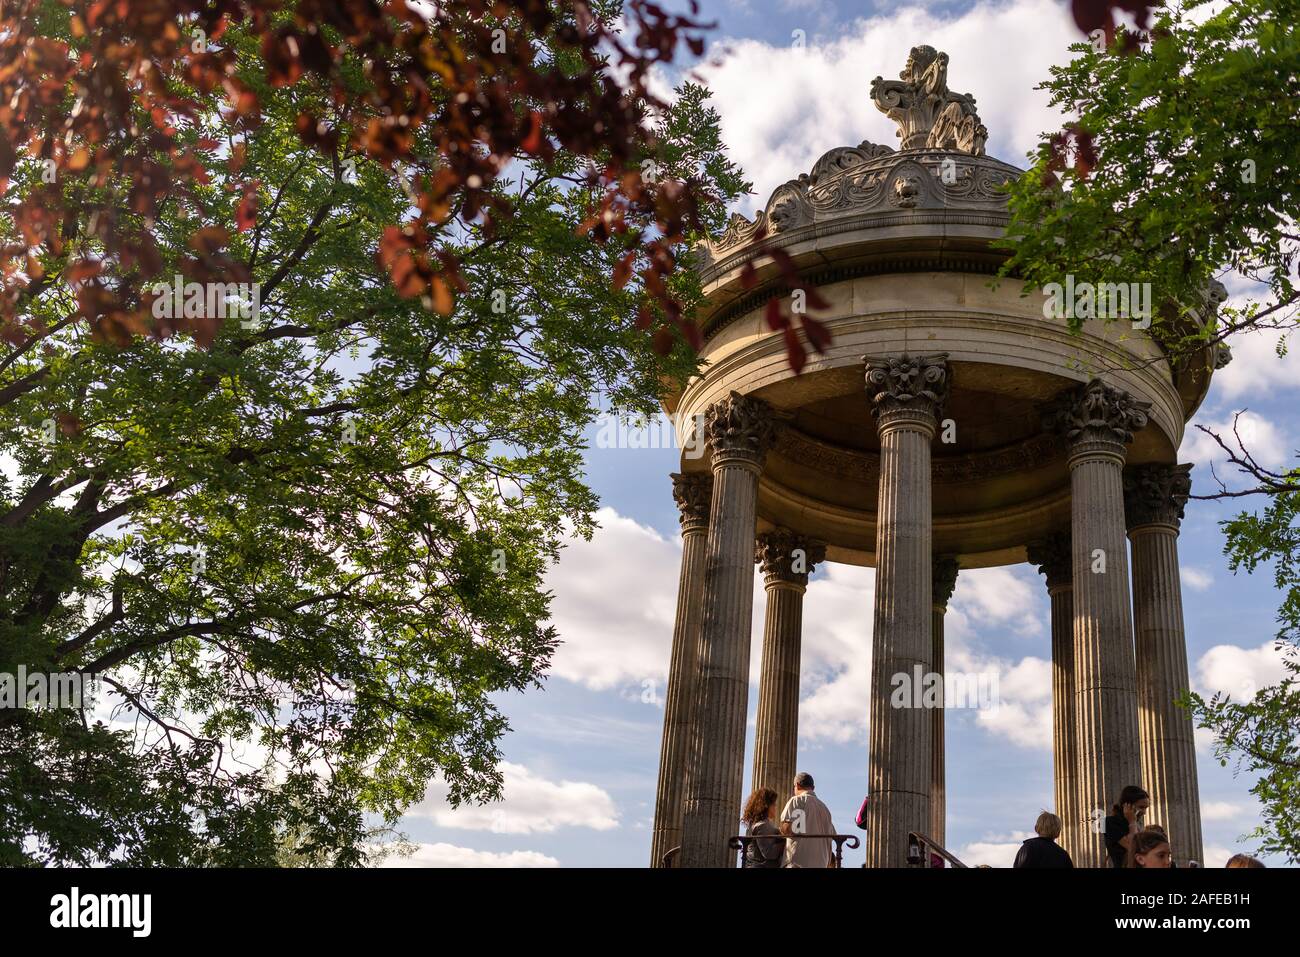 Paris, France - June 16, 2017: Visitors at the temple of the Sybil in Buttes Chaumont Park seen through tree branches, taken on a early summer sunny a Stock Photo